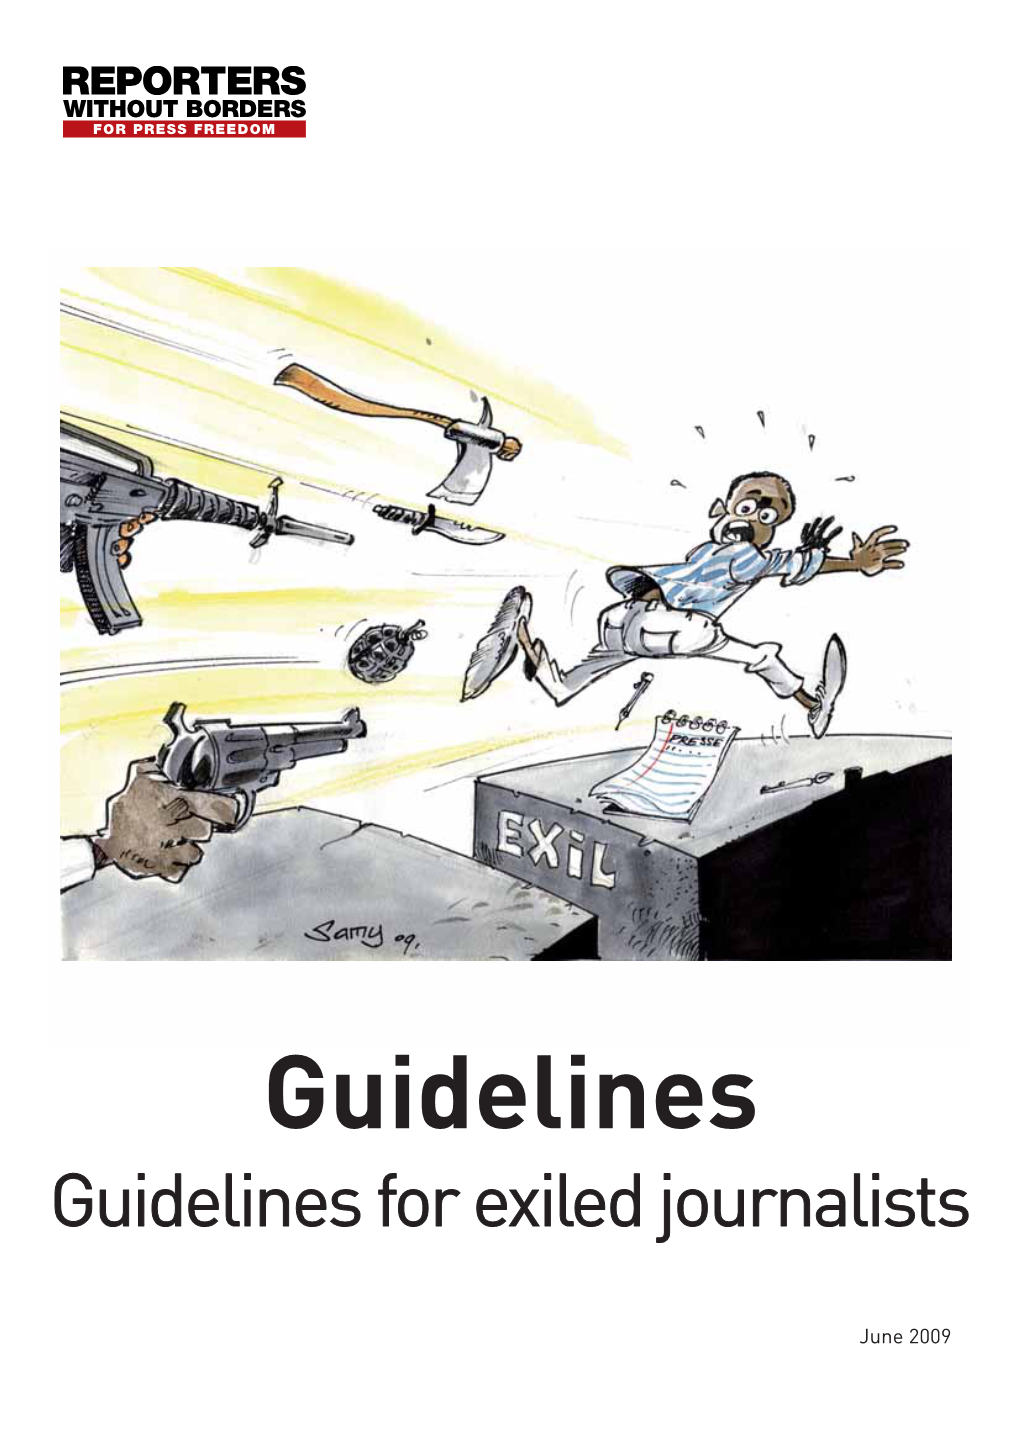 Guidelines Guidelines for Exiled Journalists